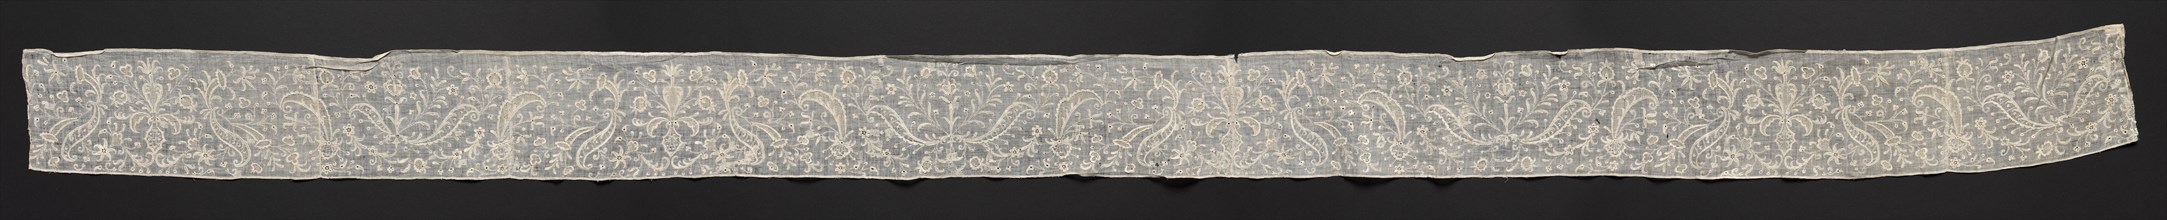 Band, 1700s. France ?, 18th century. Embroidery: linen; overall: 208.3 x 12.7 cm (82 x 5 in.)